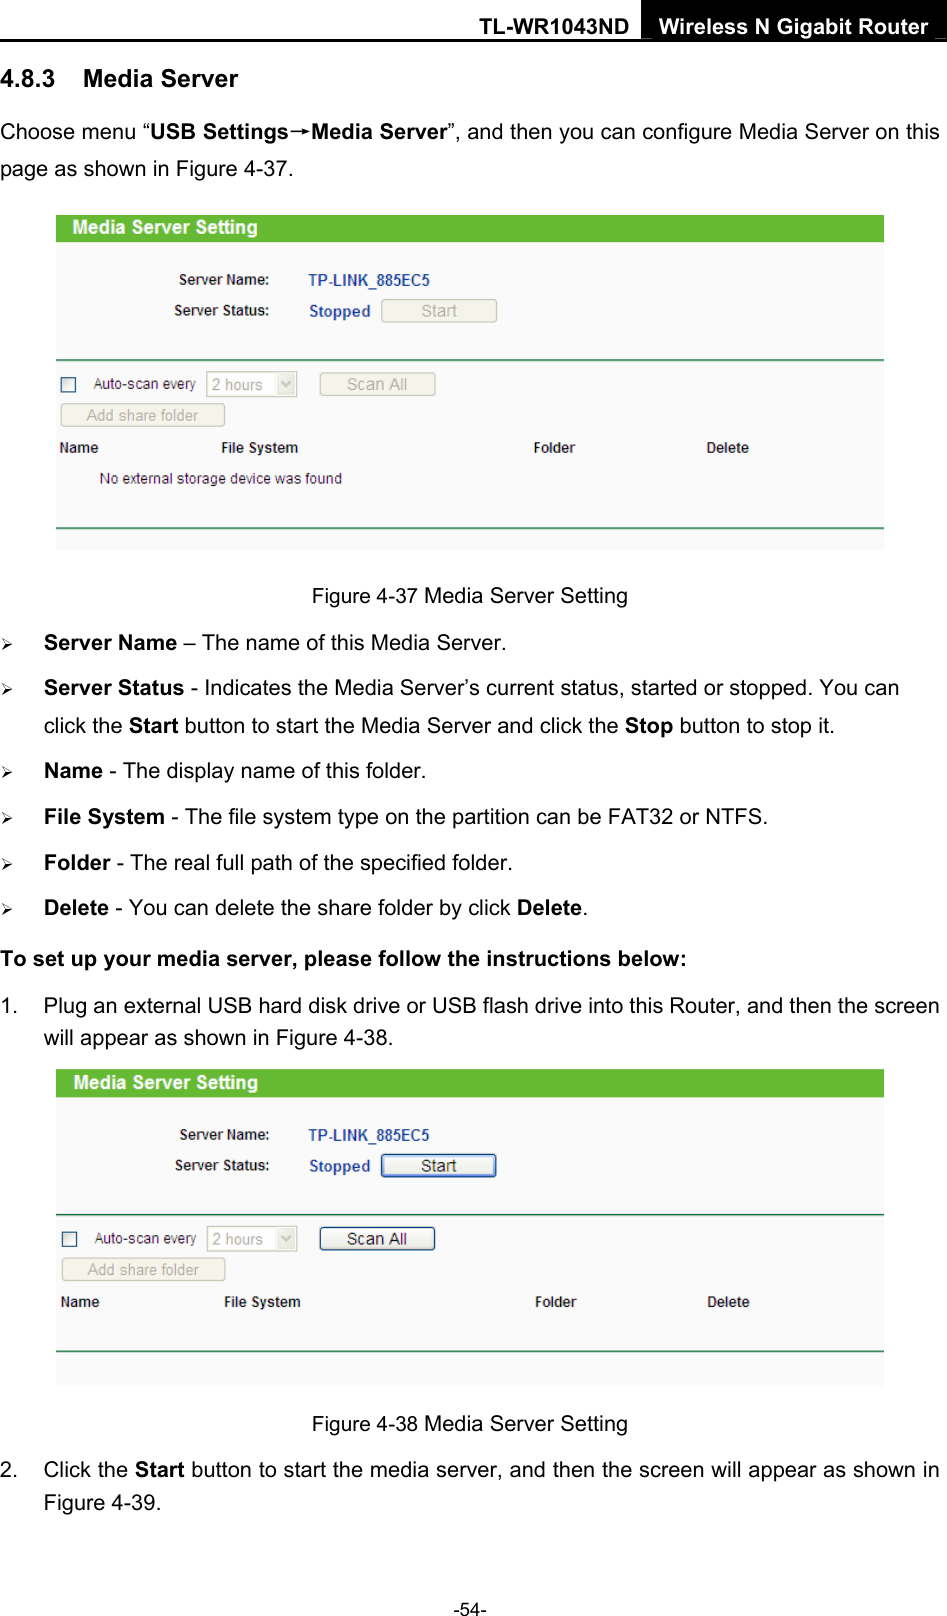 TL-WR1043ND Wireless N Gigabit Router  -54- 4.8.3  Media Server Choose menu “USB Settings→Media Server”, and then you can configure Media Server on this page as shown in Figure 4-37.  Figure 4-37 Media Server Setting ¾ Server Name – The name of this Media Server. ¾ Server Status - Indicates the Media Server’s current status, started or stopped. You can click the Start button to start the Media Server and click the Stop button to stop it.     ¾ Name - The display name of this folder.   ¾ File System - The file system type on the partition can be FAT32 or NTFS.   ¾ Folder - The real full path of the specified folder.   ¾ Delete - You can delete the share folder by click Delete. To set up your media server, please follow the instructions below:   1.  Plug an external USB hard disk drive or USB flash drive into this Router, and then the screen will appear as shown in Figure 4-38.  Figure 4-38 Media Server Setting 2. Click the Start button to start the media server, and then the screen will appear as shown in Figure 4-39. 